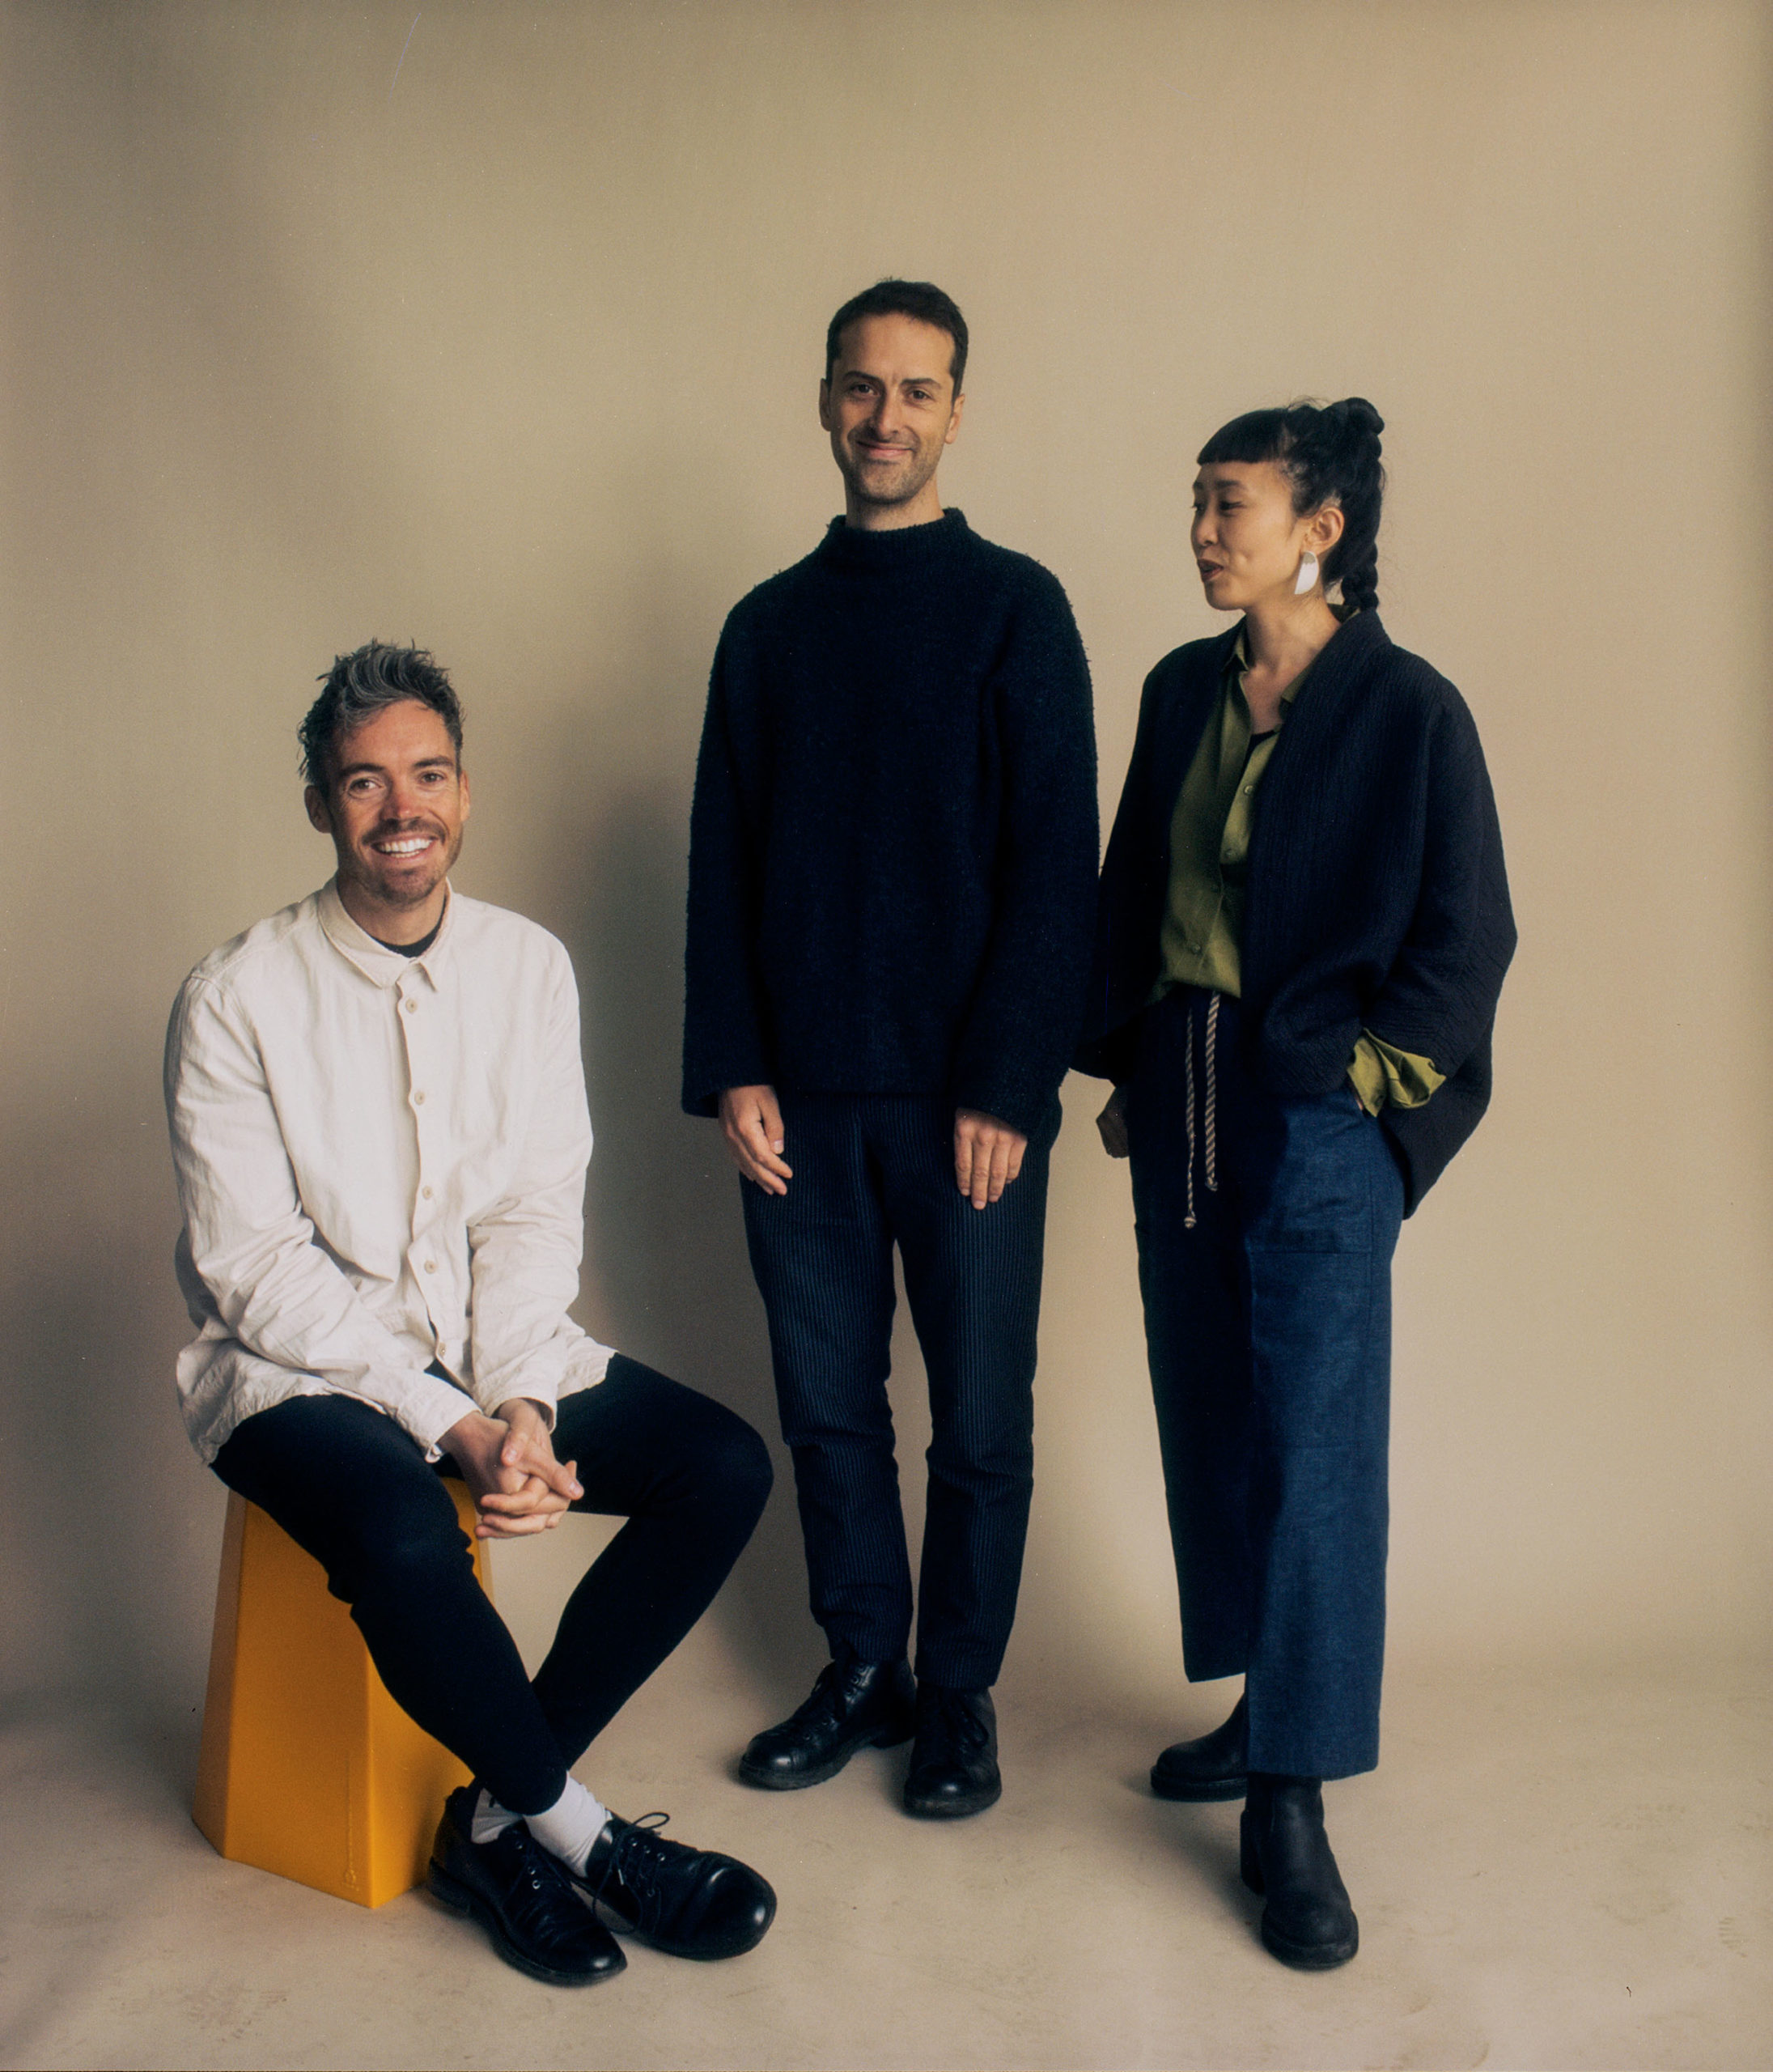 A portrait photograph of three people. The man on the left in a white shirt sits on a plinth with his legs crossed. The man in the middle is all in black. The woman on the right is looking to the left of the frame and has her hands in her pockets.